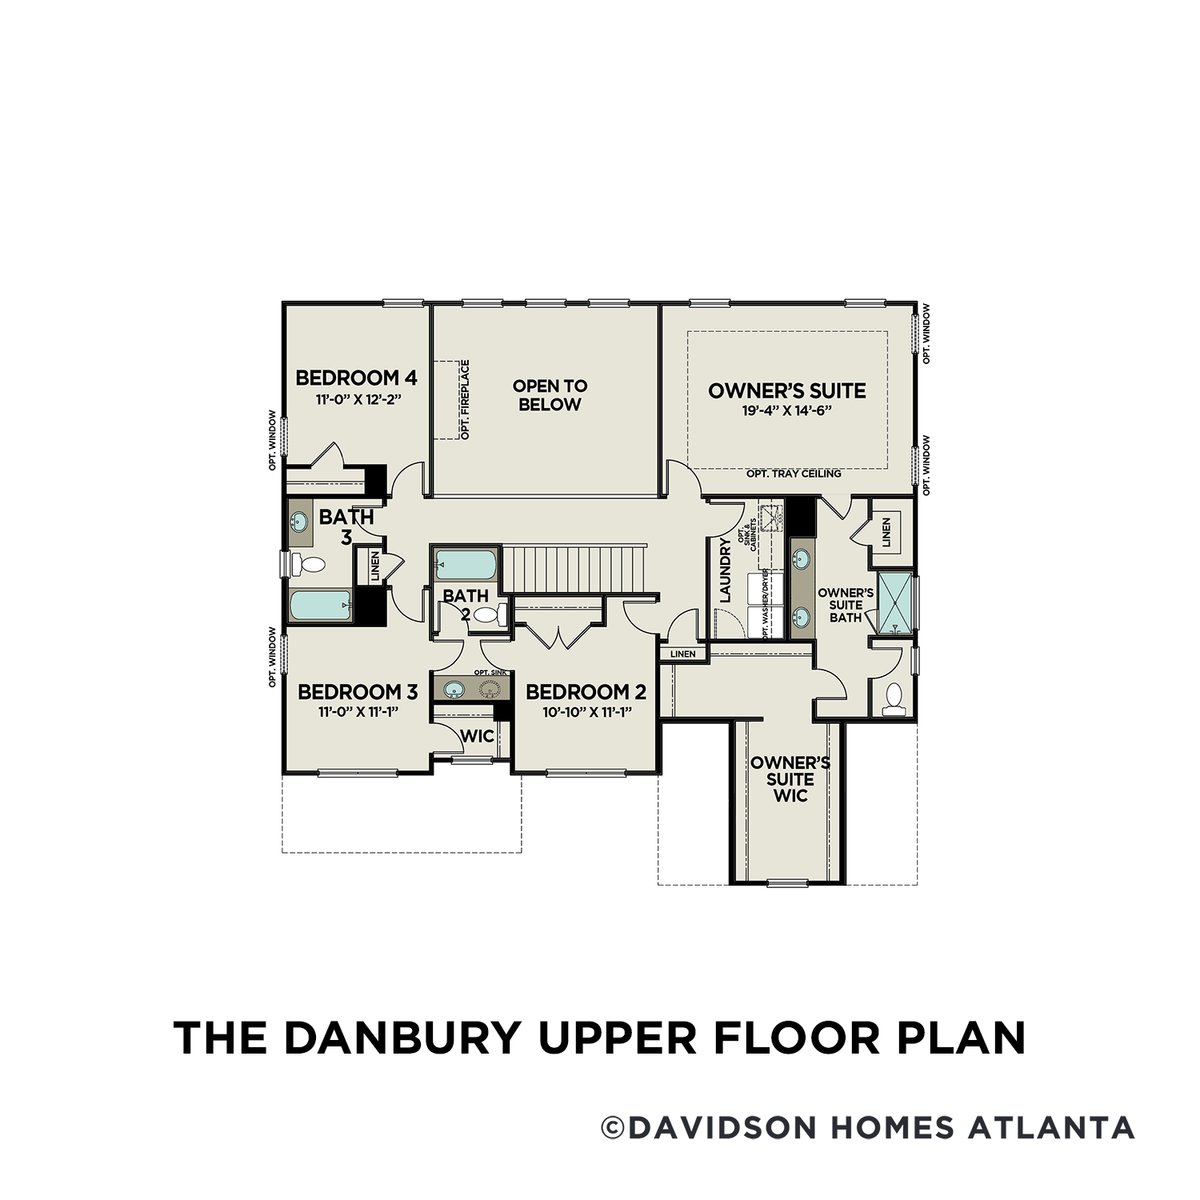 2 - The Danbury A buildable floor plan layout in Davidson Homes' Riverwood community.